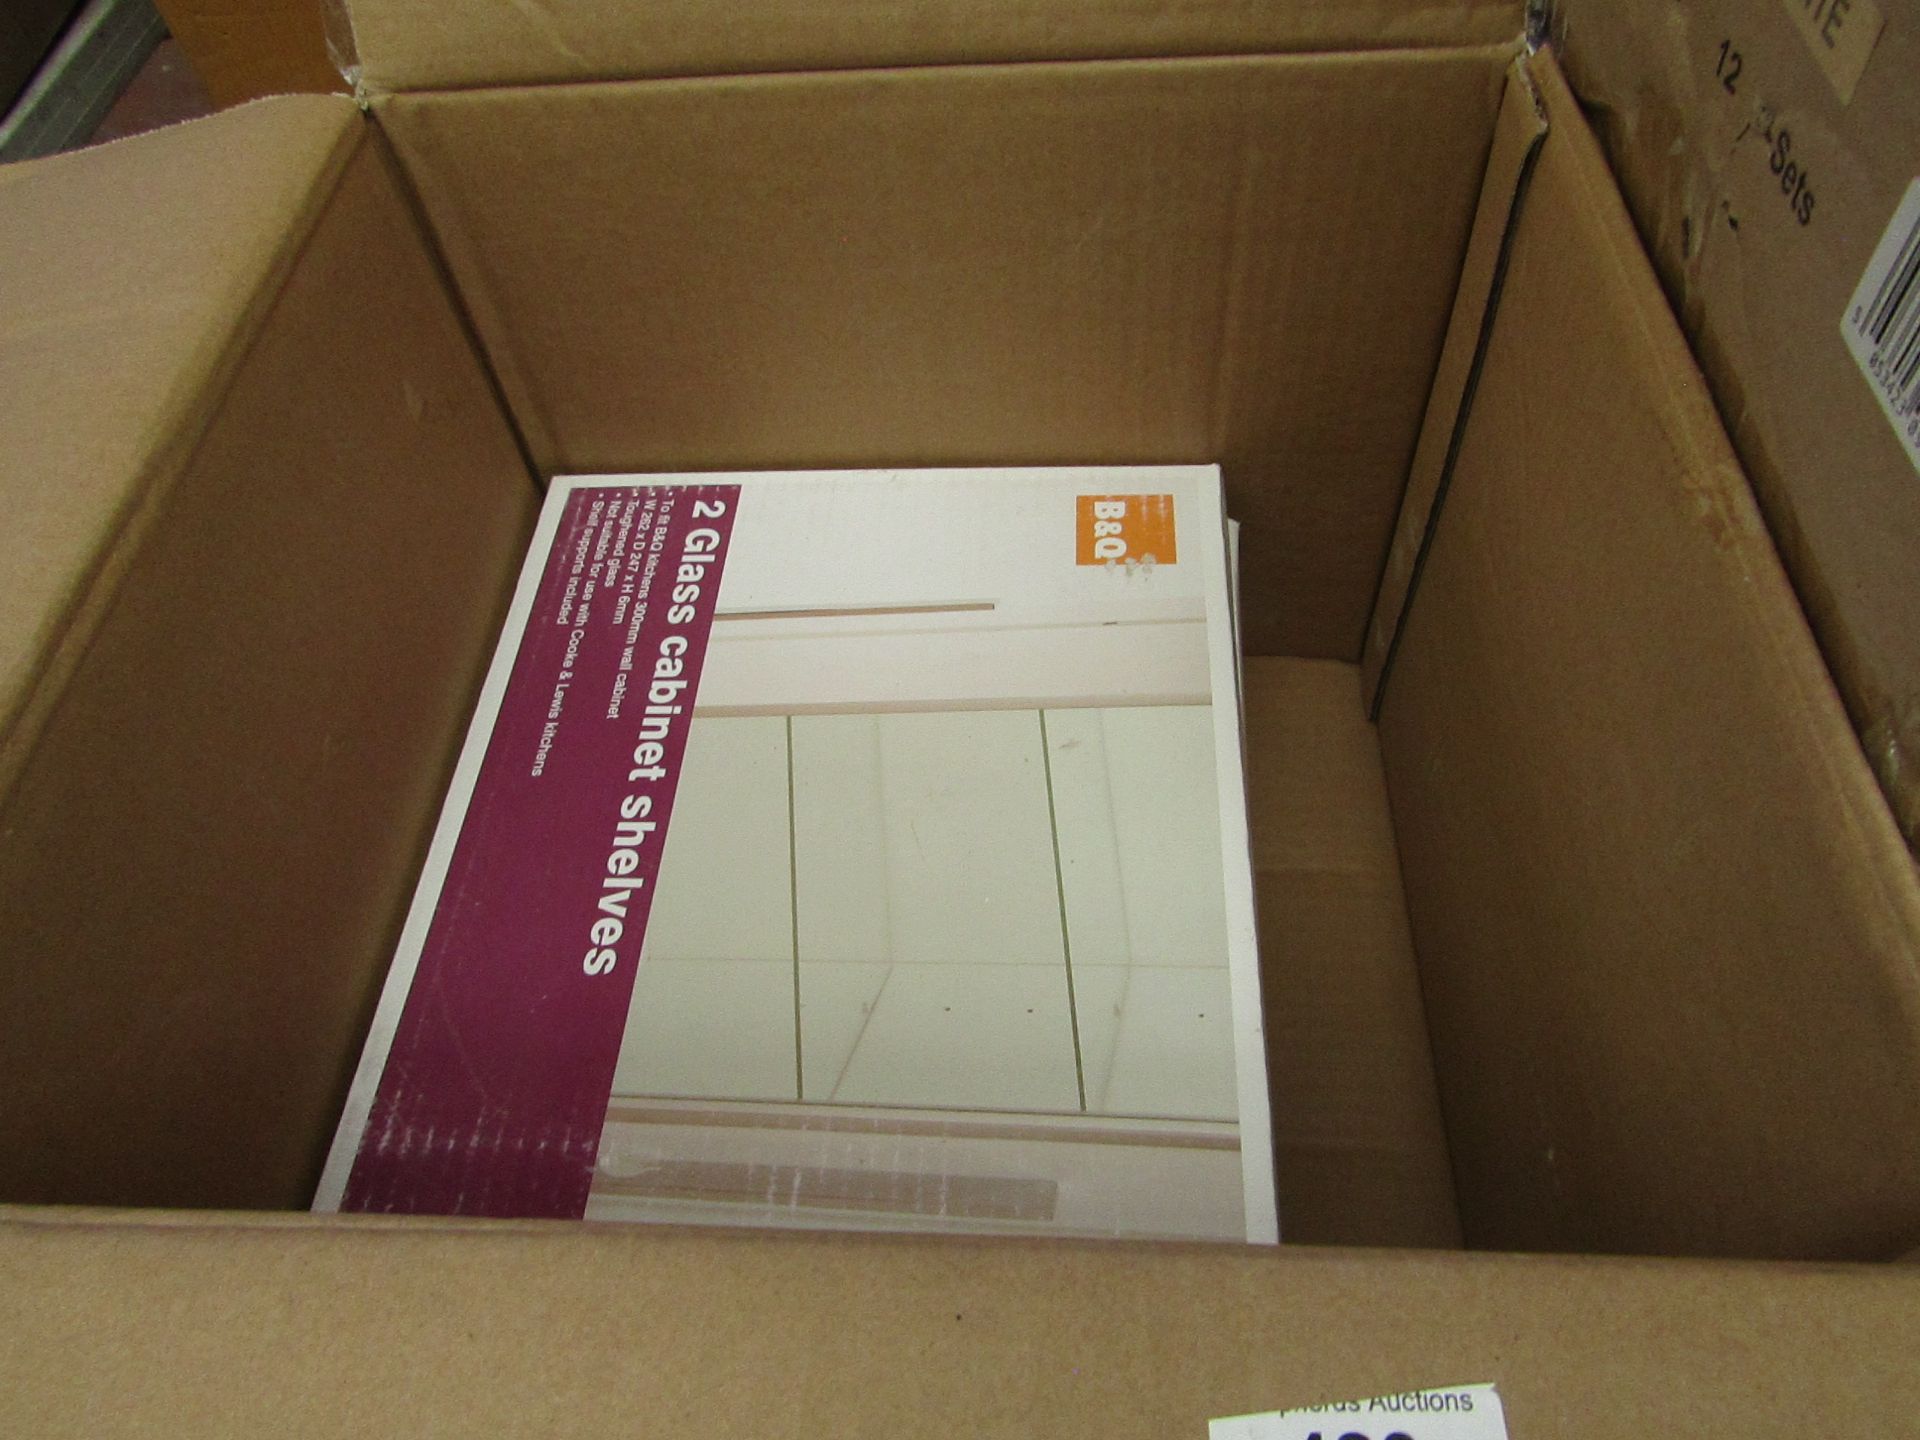 5x B&Q 2 glass cabinet shelves 262 x 247mm, unchecked and boxed.